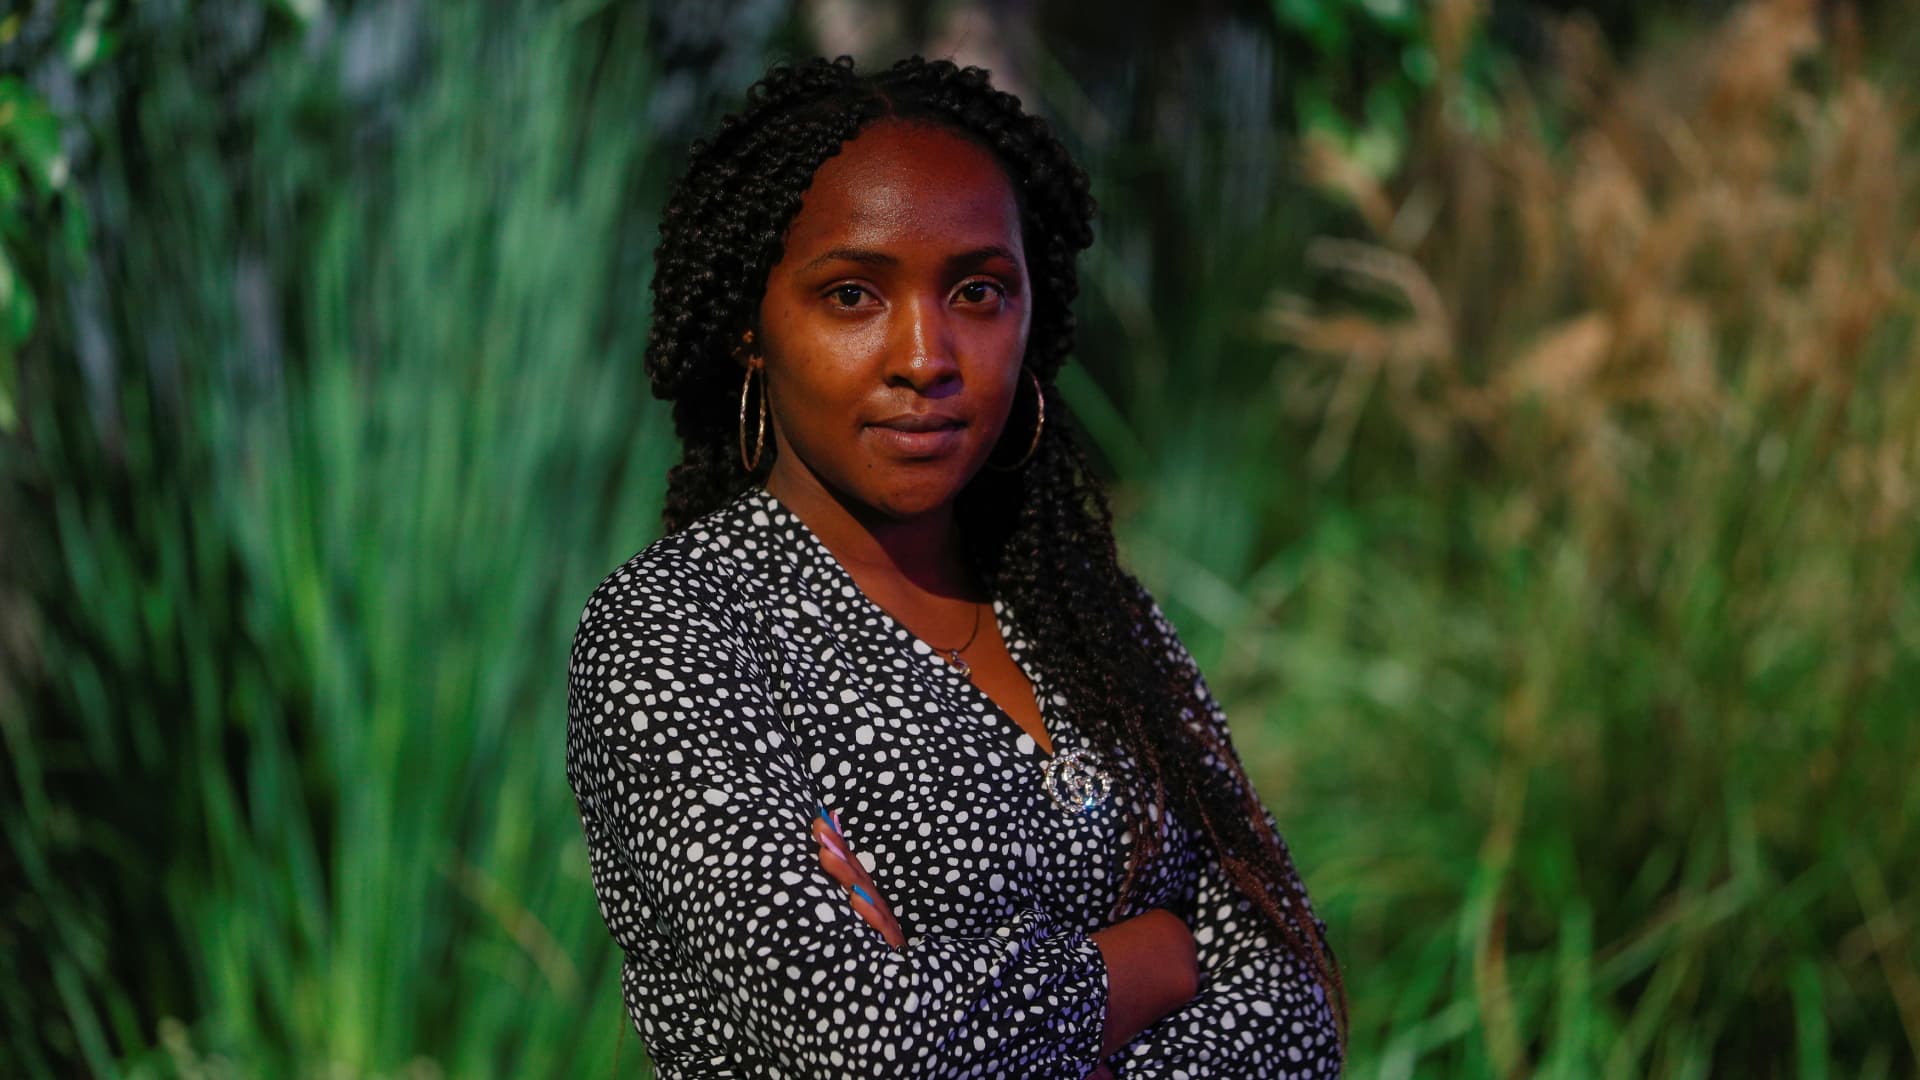 Climate activist Elizabeth Wathuti, 26, from Kenya poses for a photo during the Youth4Climate pre-COP26 conference in Milan, Italy, September 28, 2021.